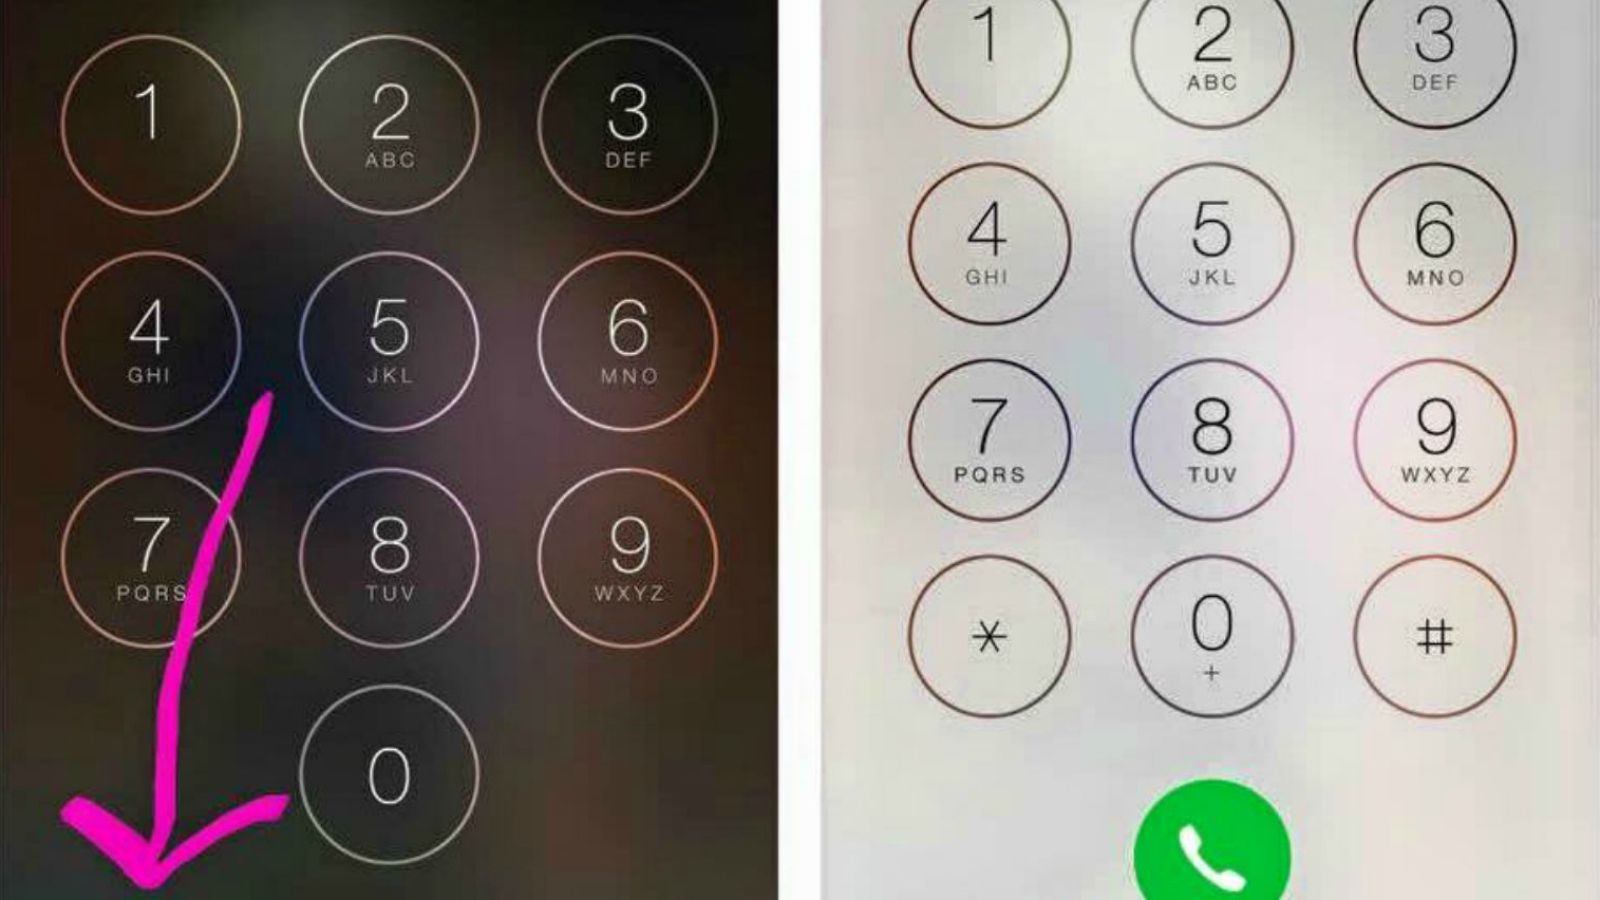 Nurse Urges All iPhone Users to Immediately Enable This Life-Saving Feature